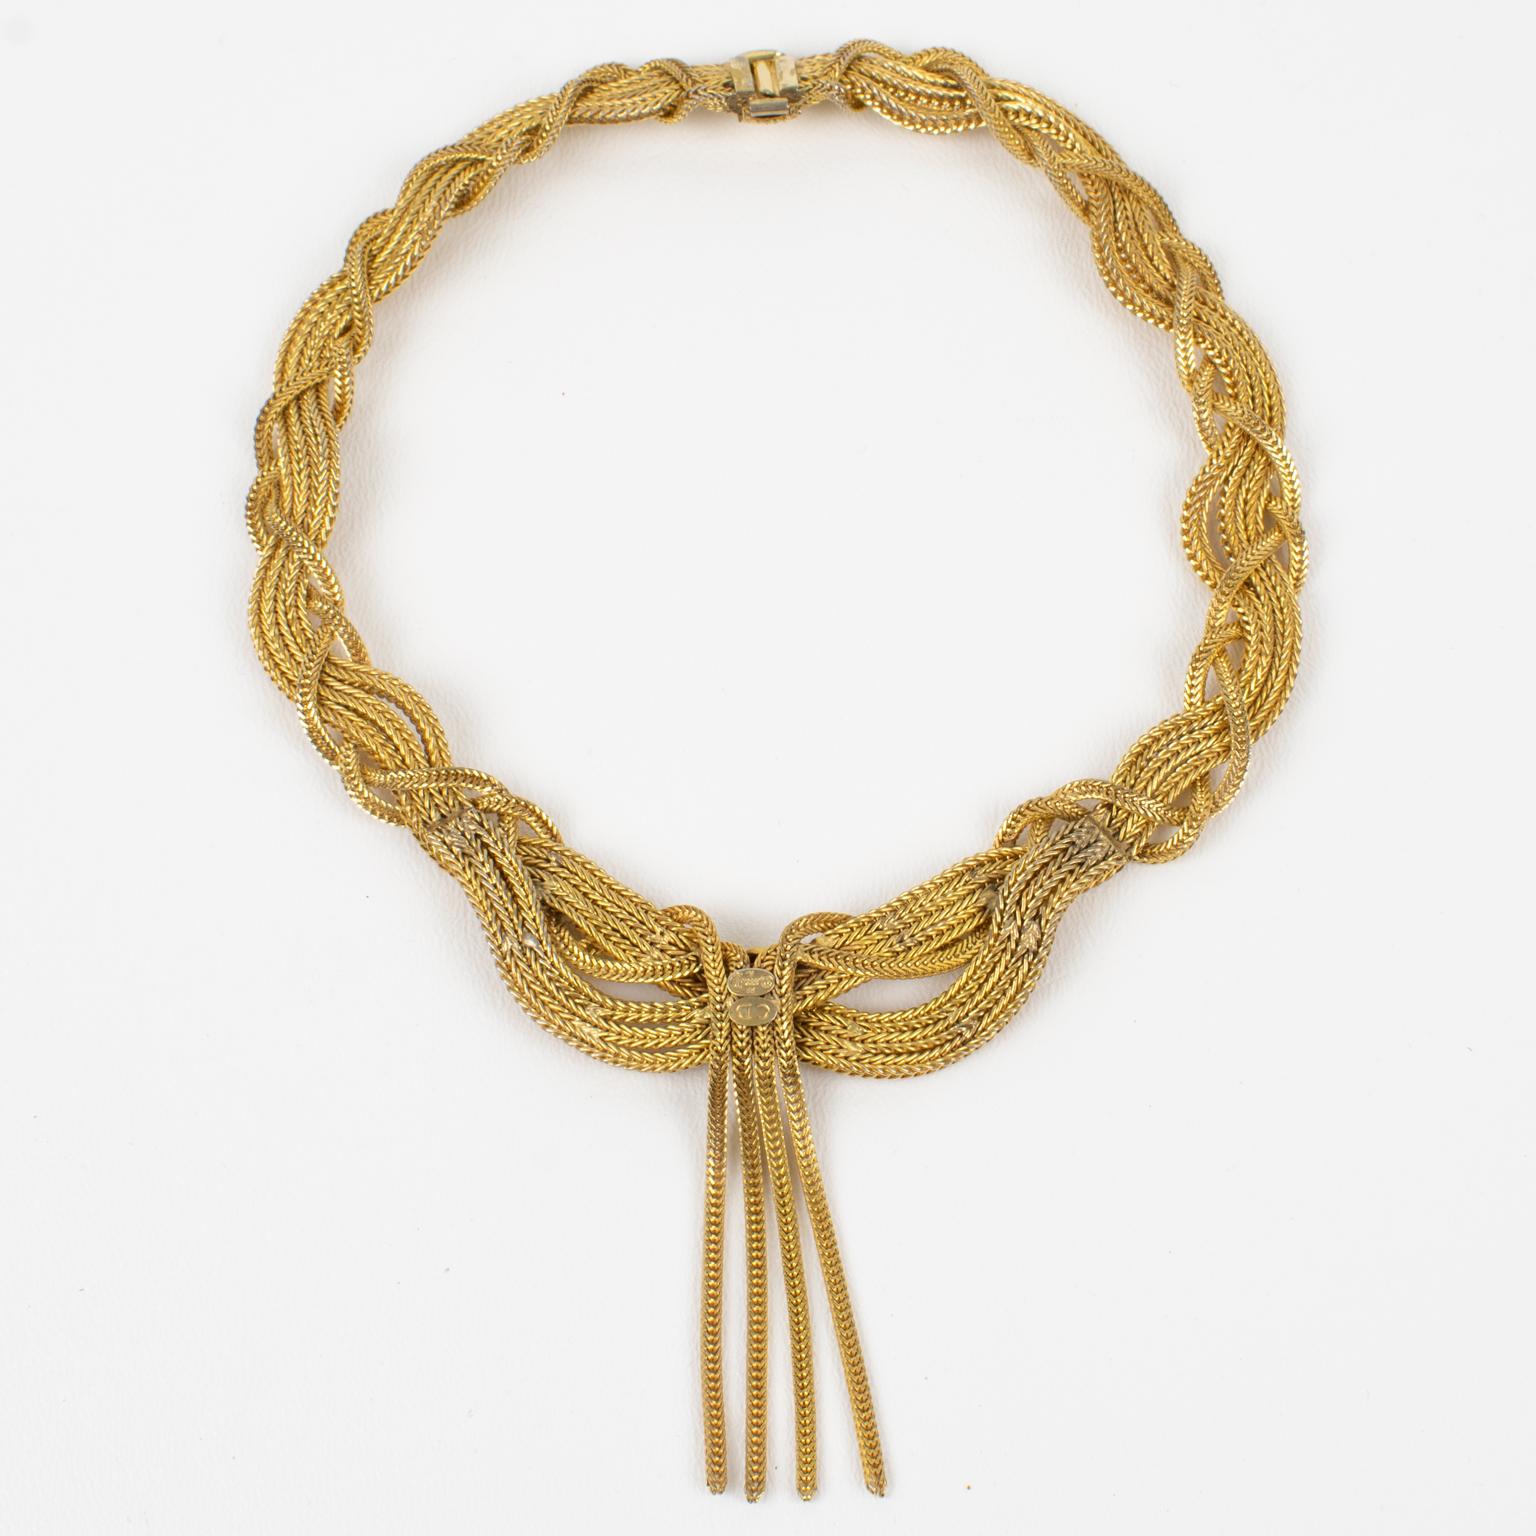 Christian Dior by Grosse 1958 Gilded Metal Braided Choker Necklace For Sale 8